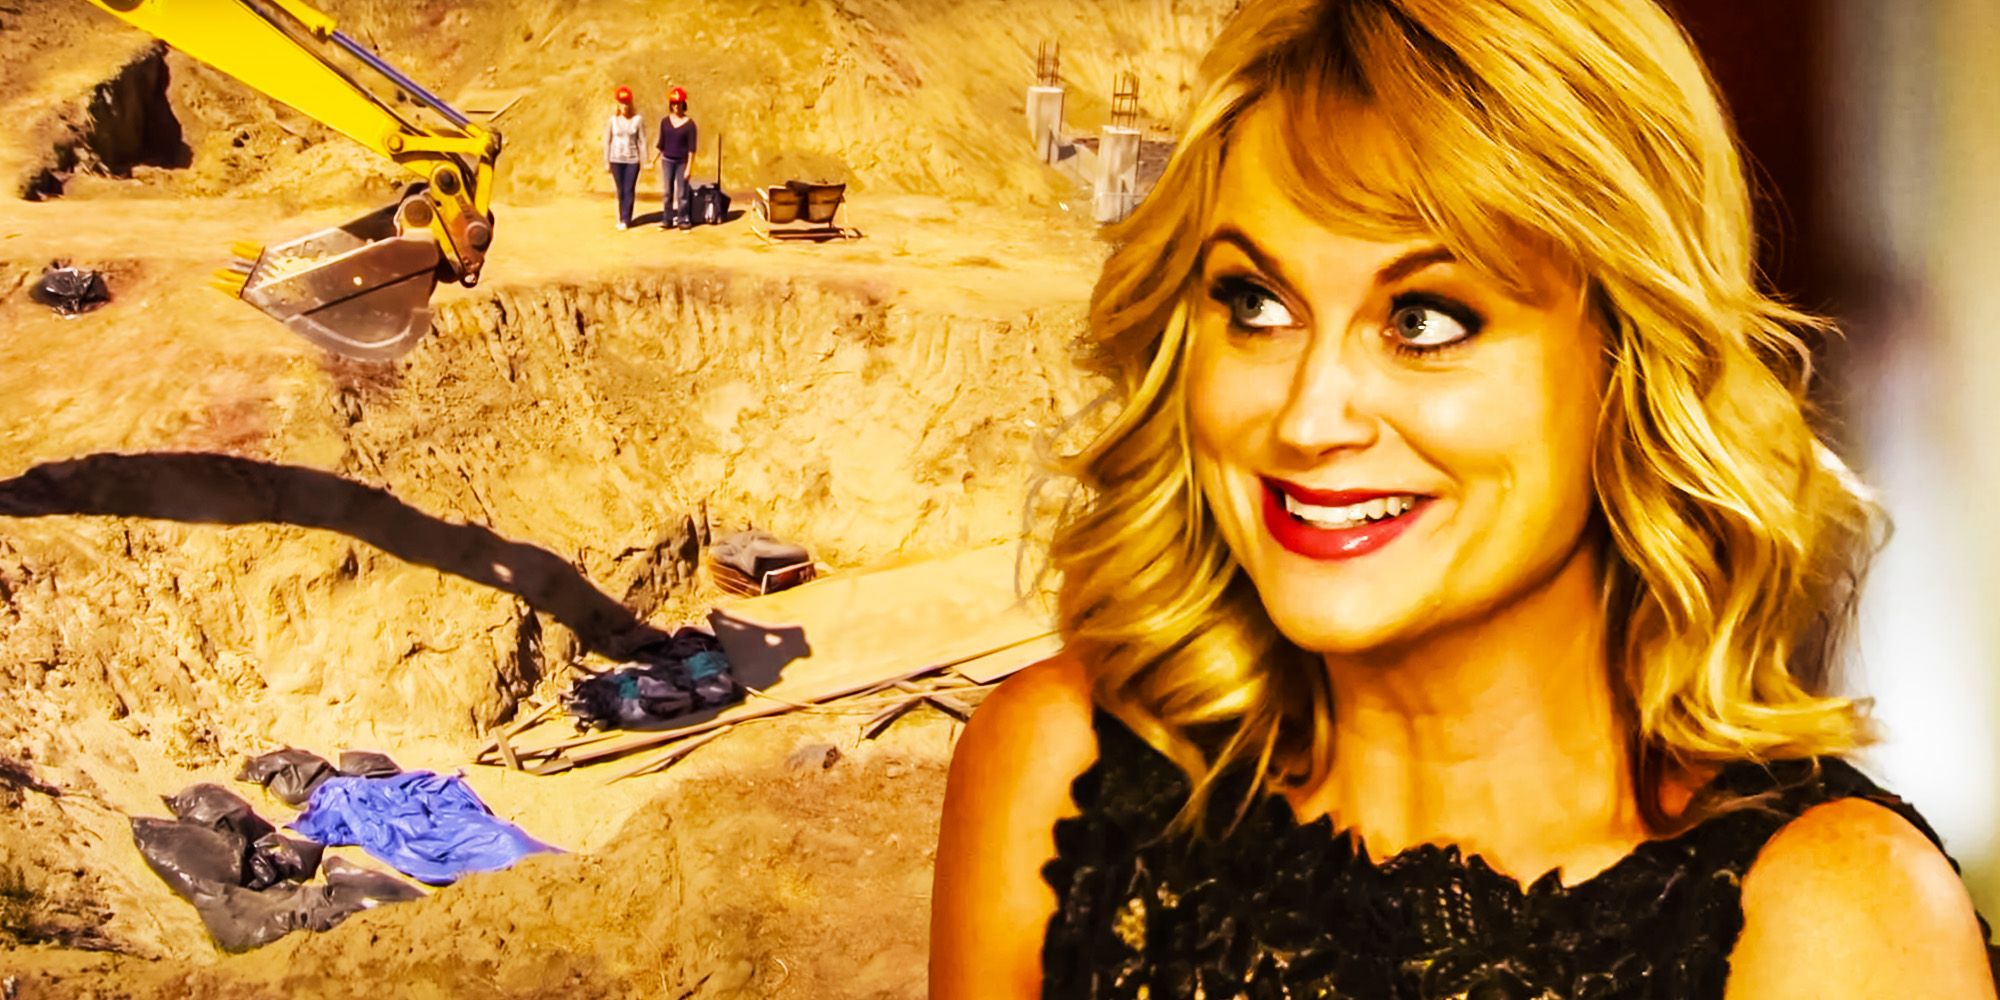 Parks & Rec Stars Reunite For Game Of Thrones Inspired Super Bowl Ad